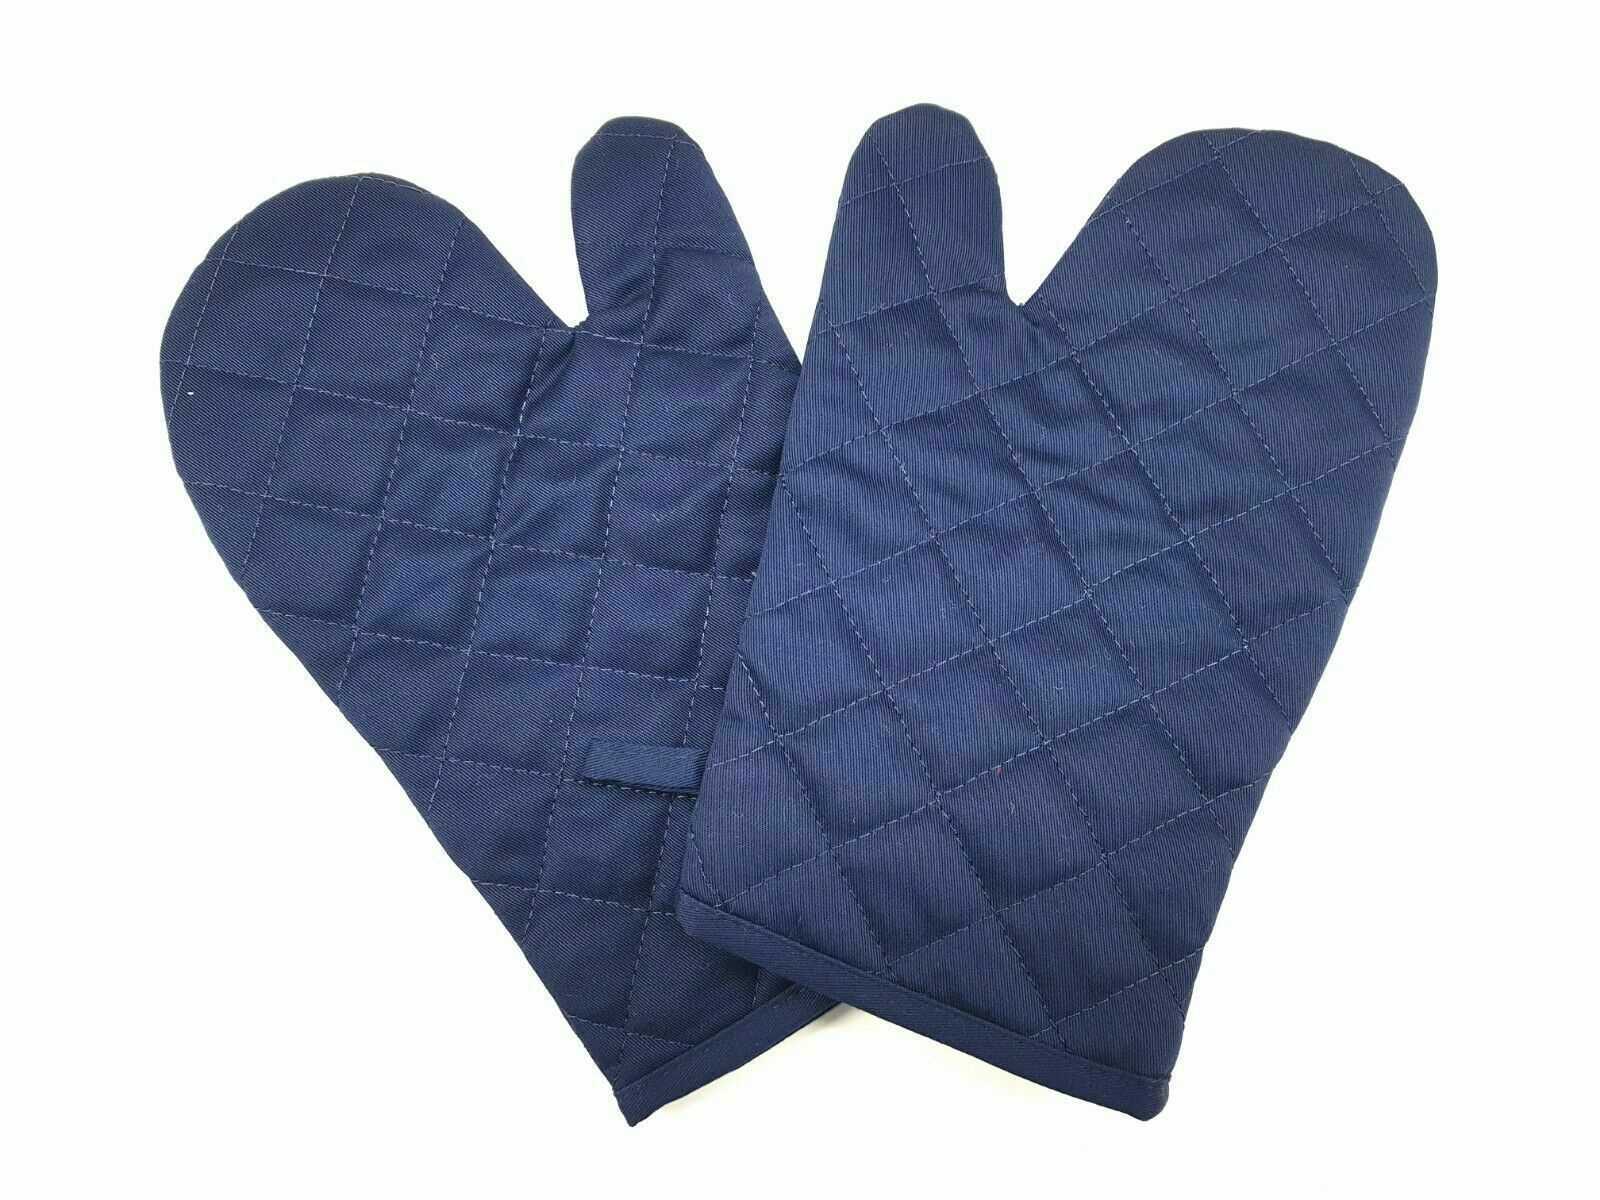 1 Pair Oven Gloves Heat Resistant Quilted Mitts Skin Friendly For Cooking Baking